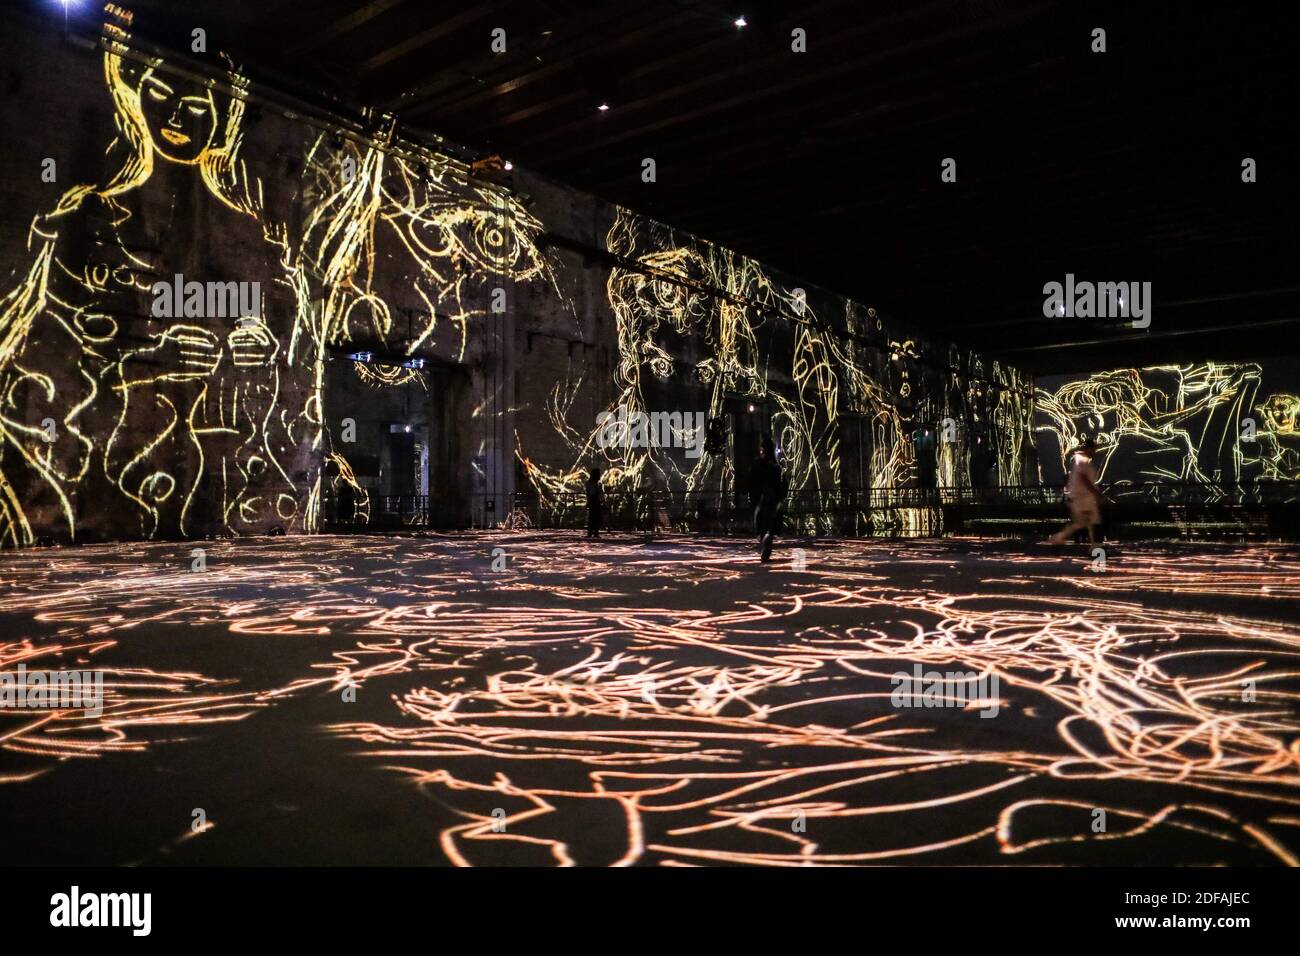 Works by Austrian artist Gustav Klimt are projected on June 4, 2020 in Bordeaux at the 'Bassins de Lumieres' digital art center as part of one of the center's opening exhibitions entitled 'Gustav Klimt: gold and colour'. Located in BordeauxâÂ€Â™s former submarine base, the Bassins de Lumières will present monumental immersive digital exhibitions devoted to the major artists in the history of art and contemporary art. Photo by Thibaud Moritz/ABACAPRESS.COM Stock Photo